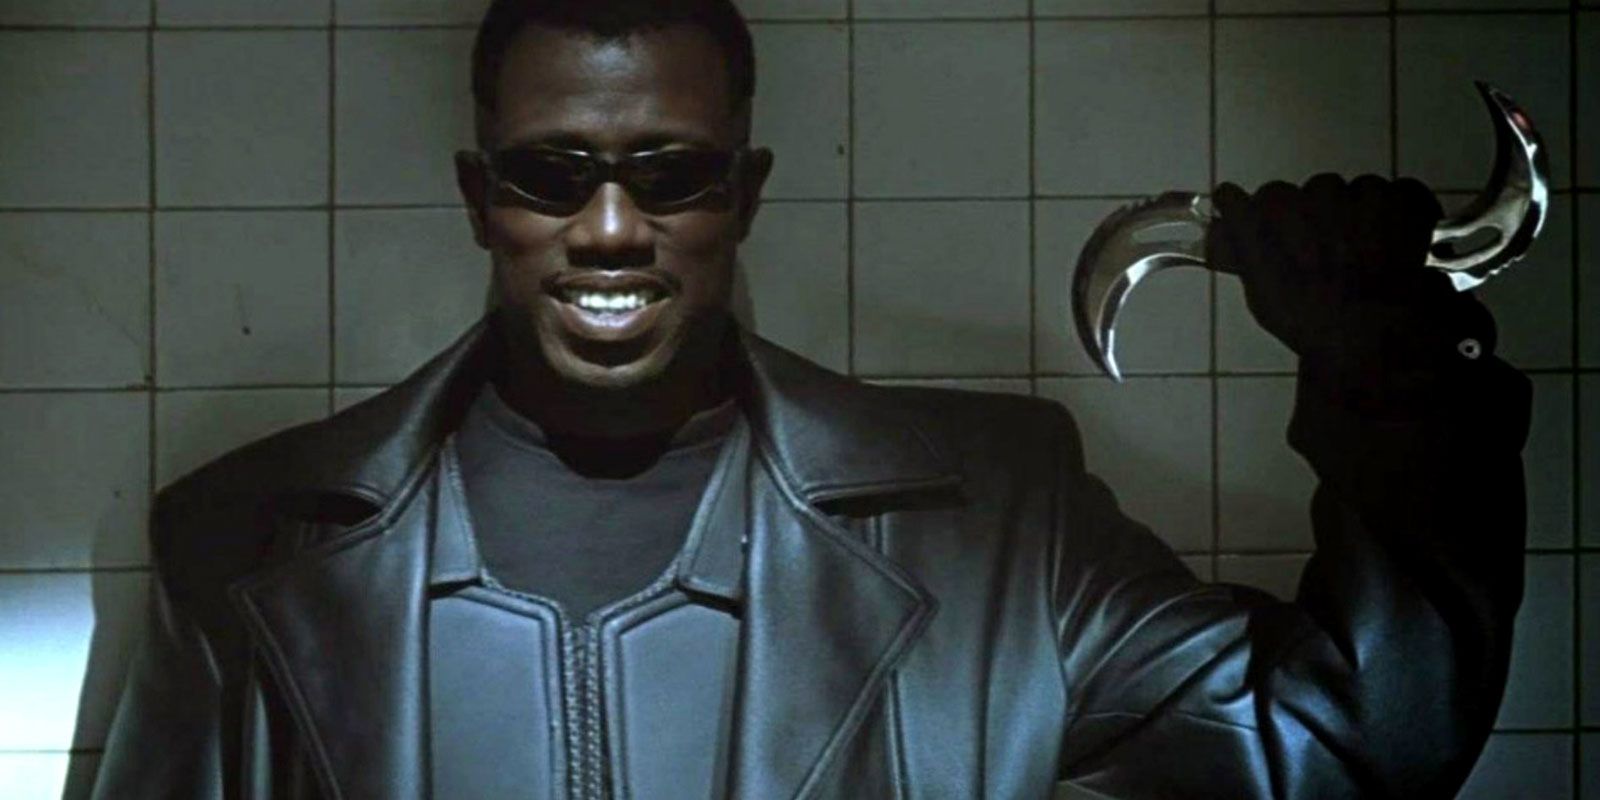 Wesley Snipes as Blade, with a devious grin.